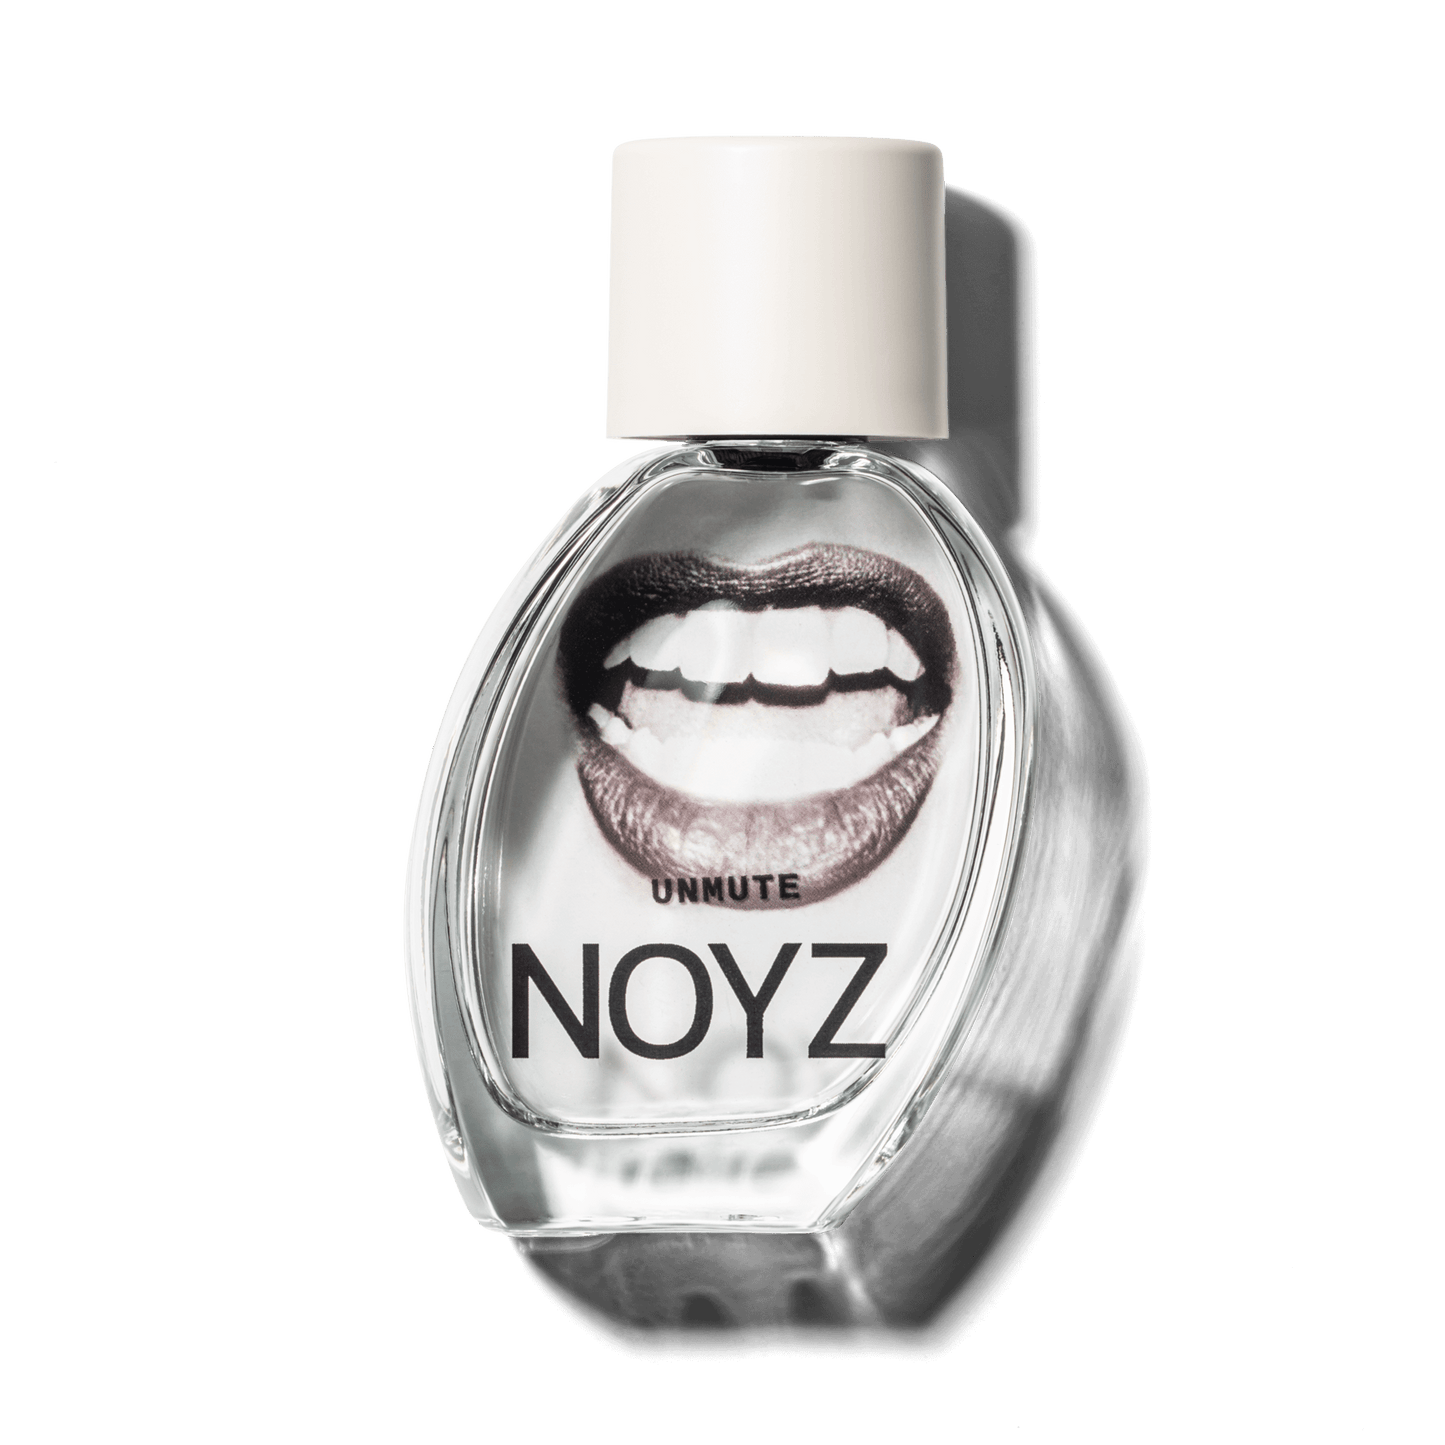 A bottle of NOYZ perfume Unmute features an open mouth. Discover this perfume with vanilla notes